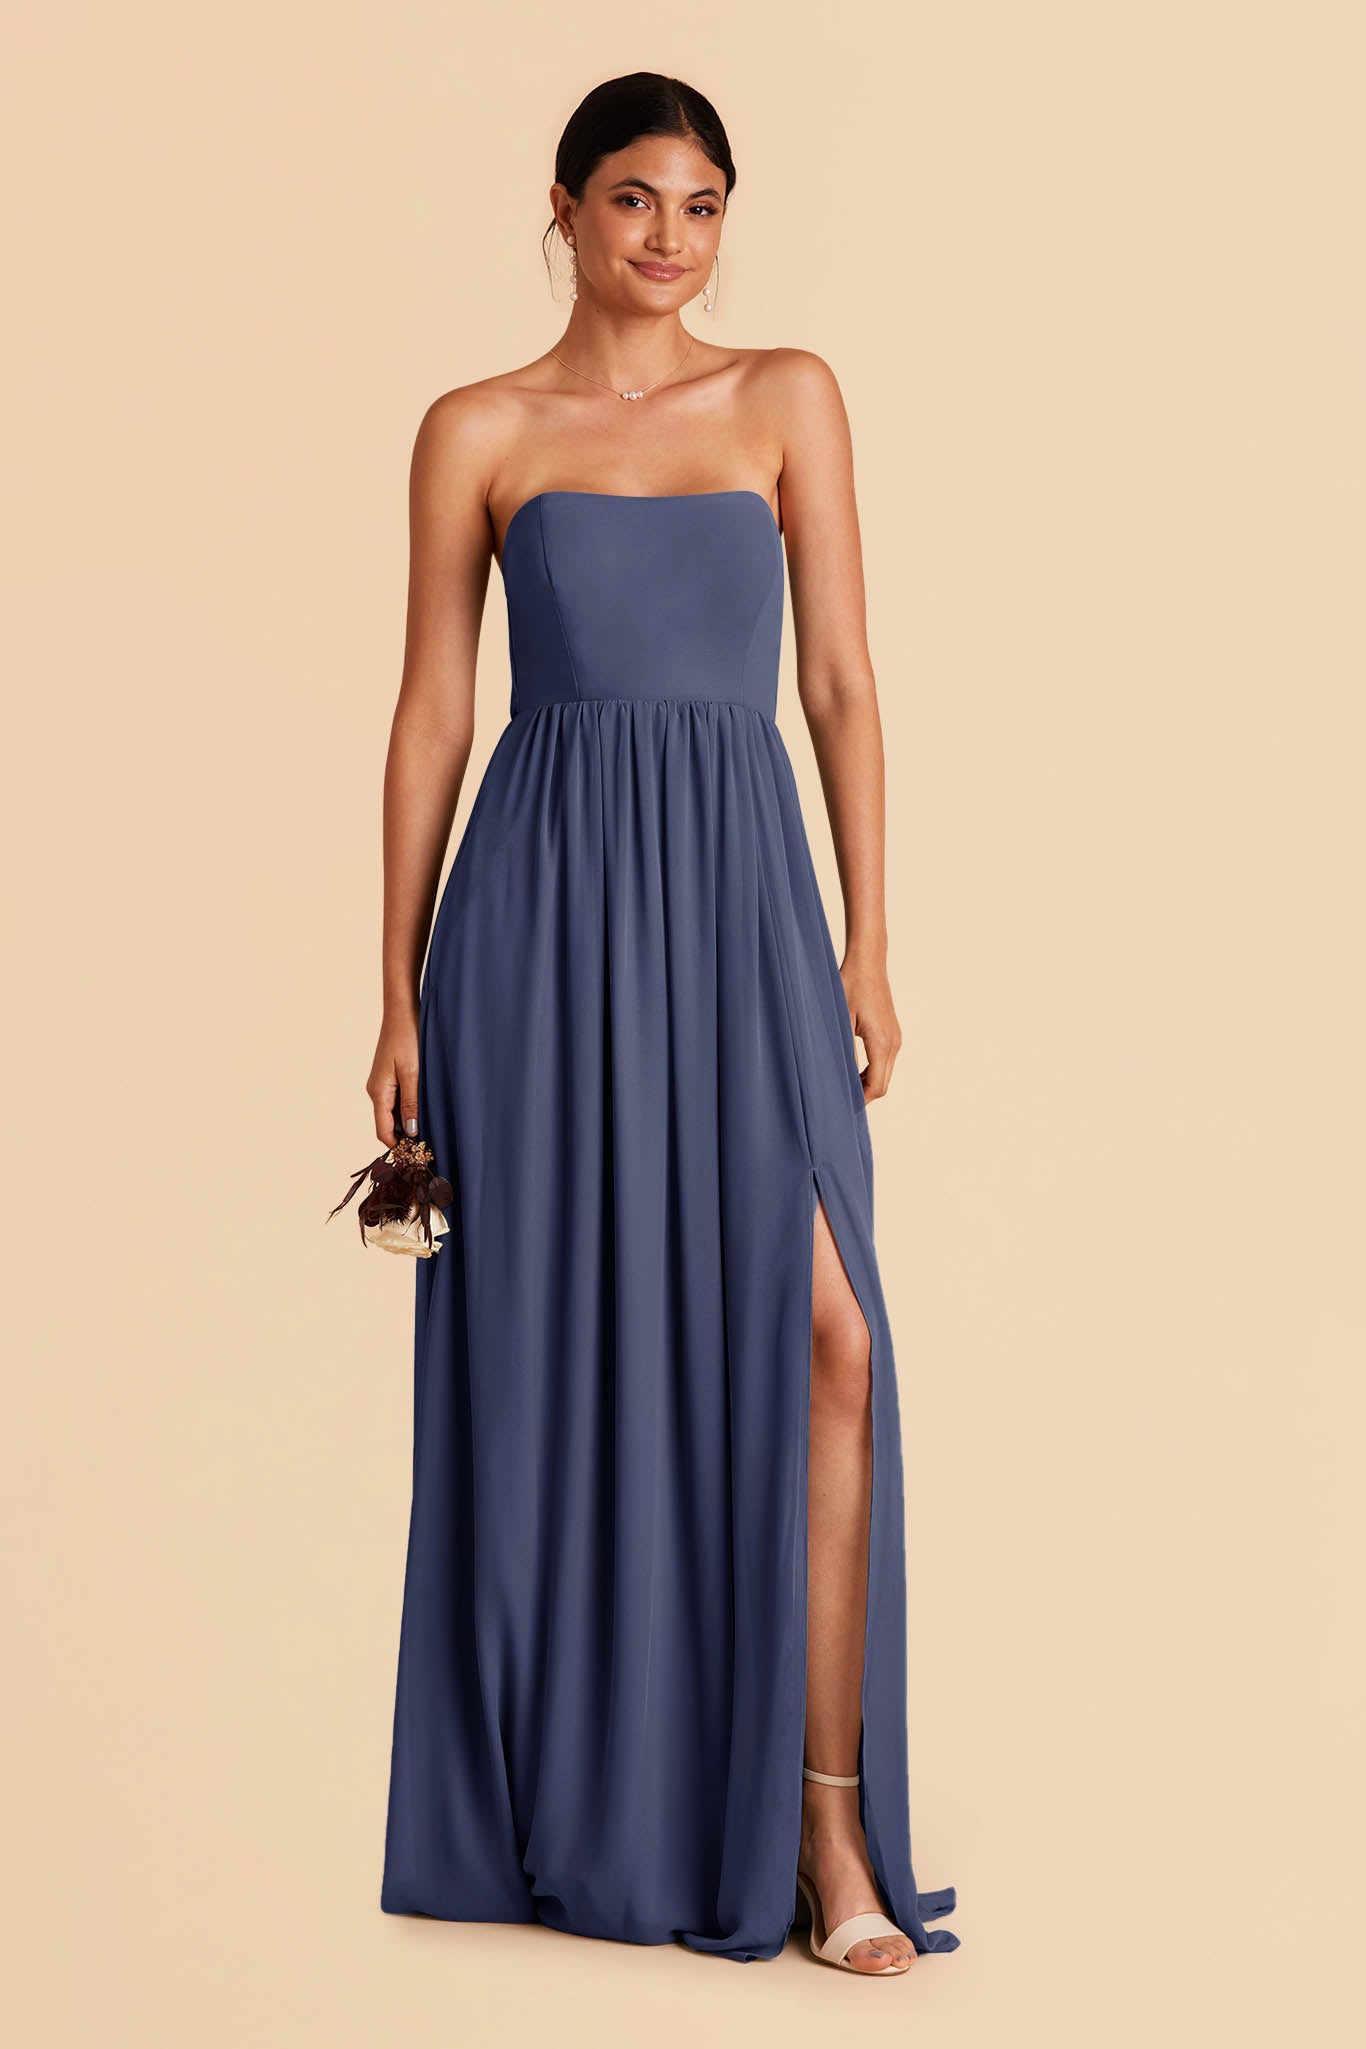 Slate Blue August Convertible Dress by Birdy Grey